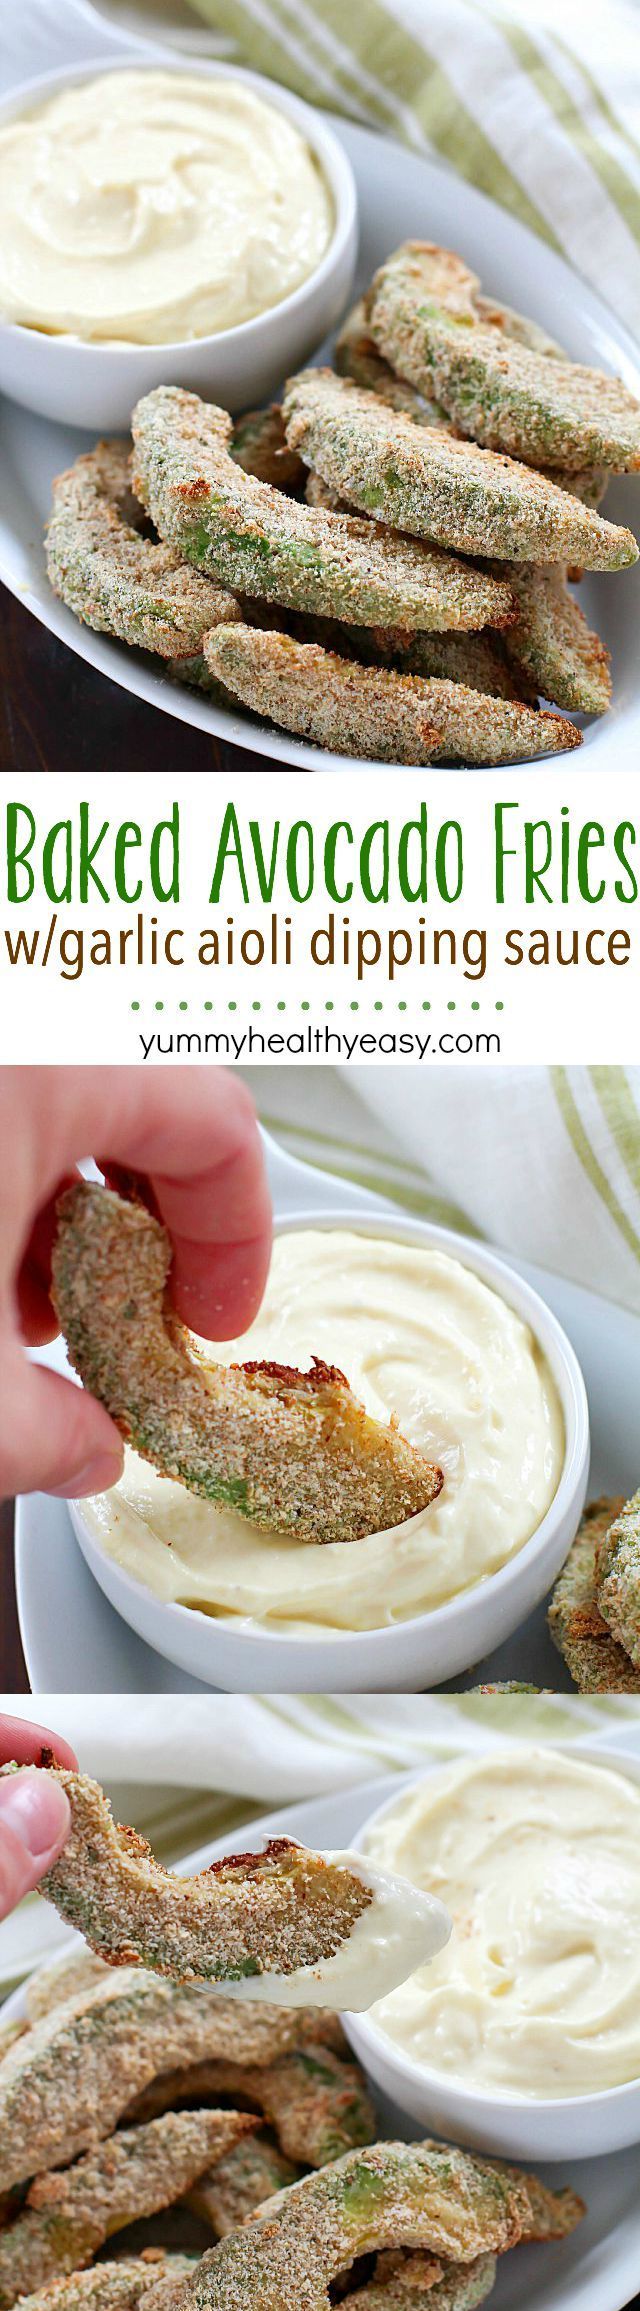 Baked Avocado Fries – these are incredible! Dip them in a homemade garlic aioli and you’ll be in heaven. A